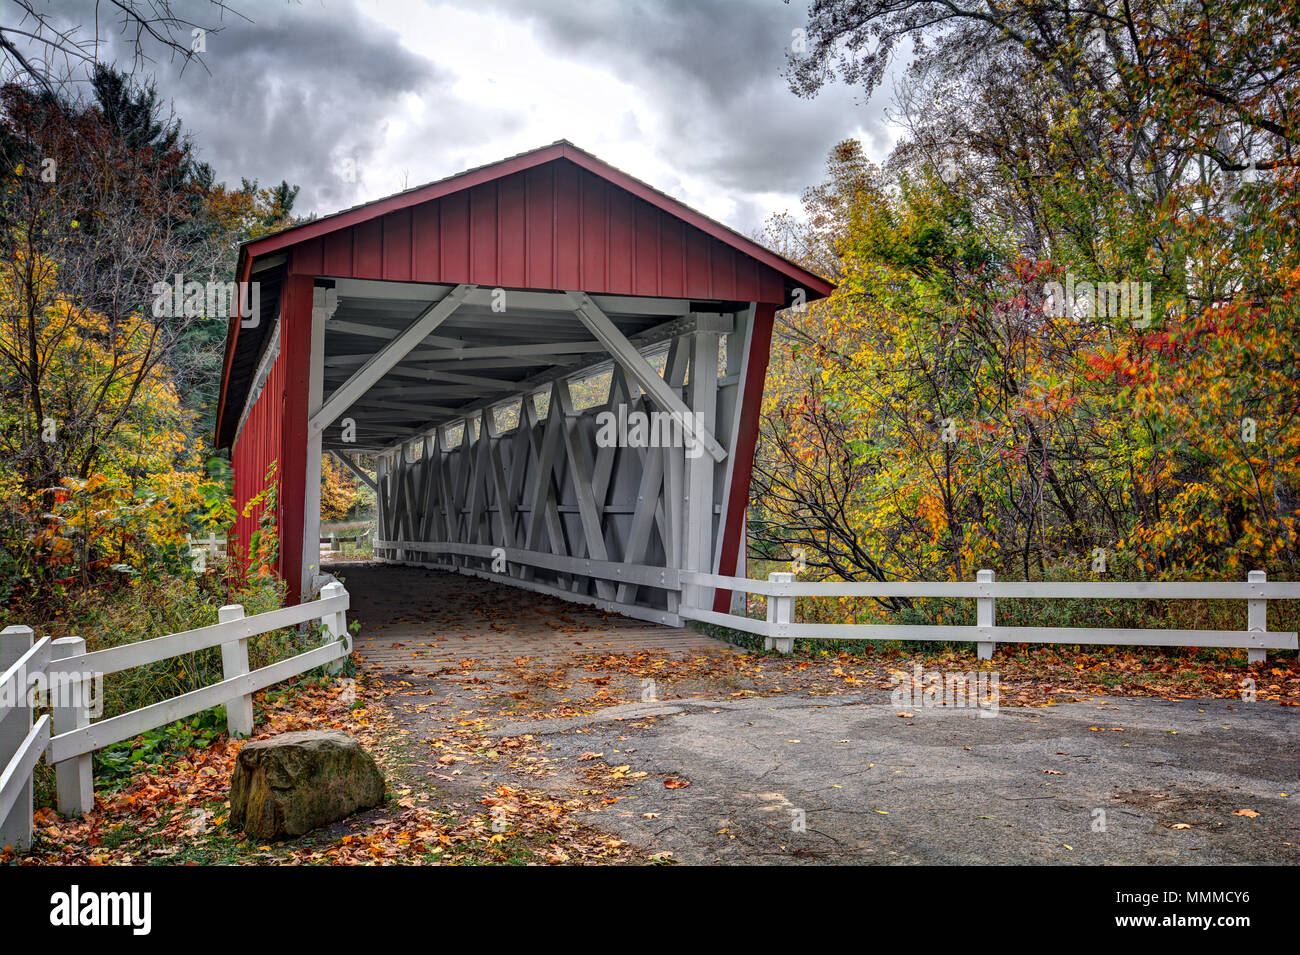 The Everett Road Covered Bridge in the Cuyahoga Valley National Park in Peninsula Ohio. Stock Photo